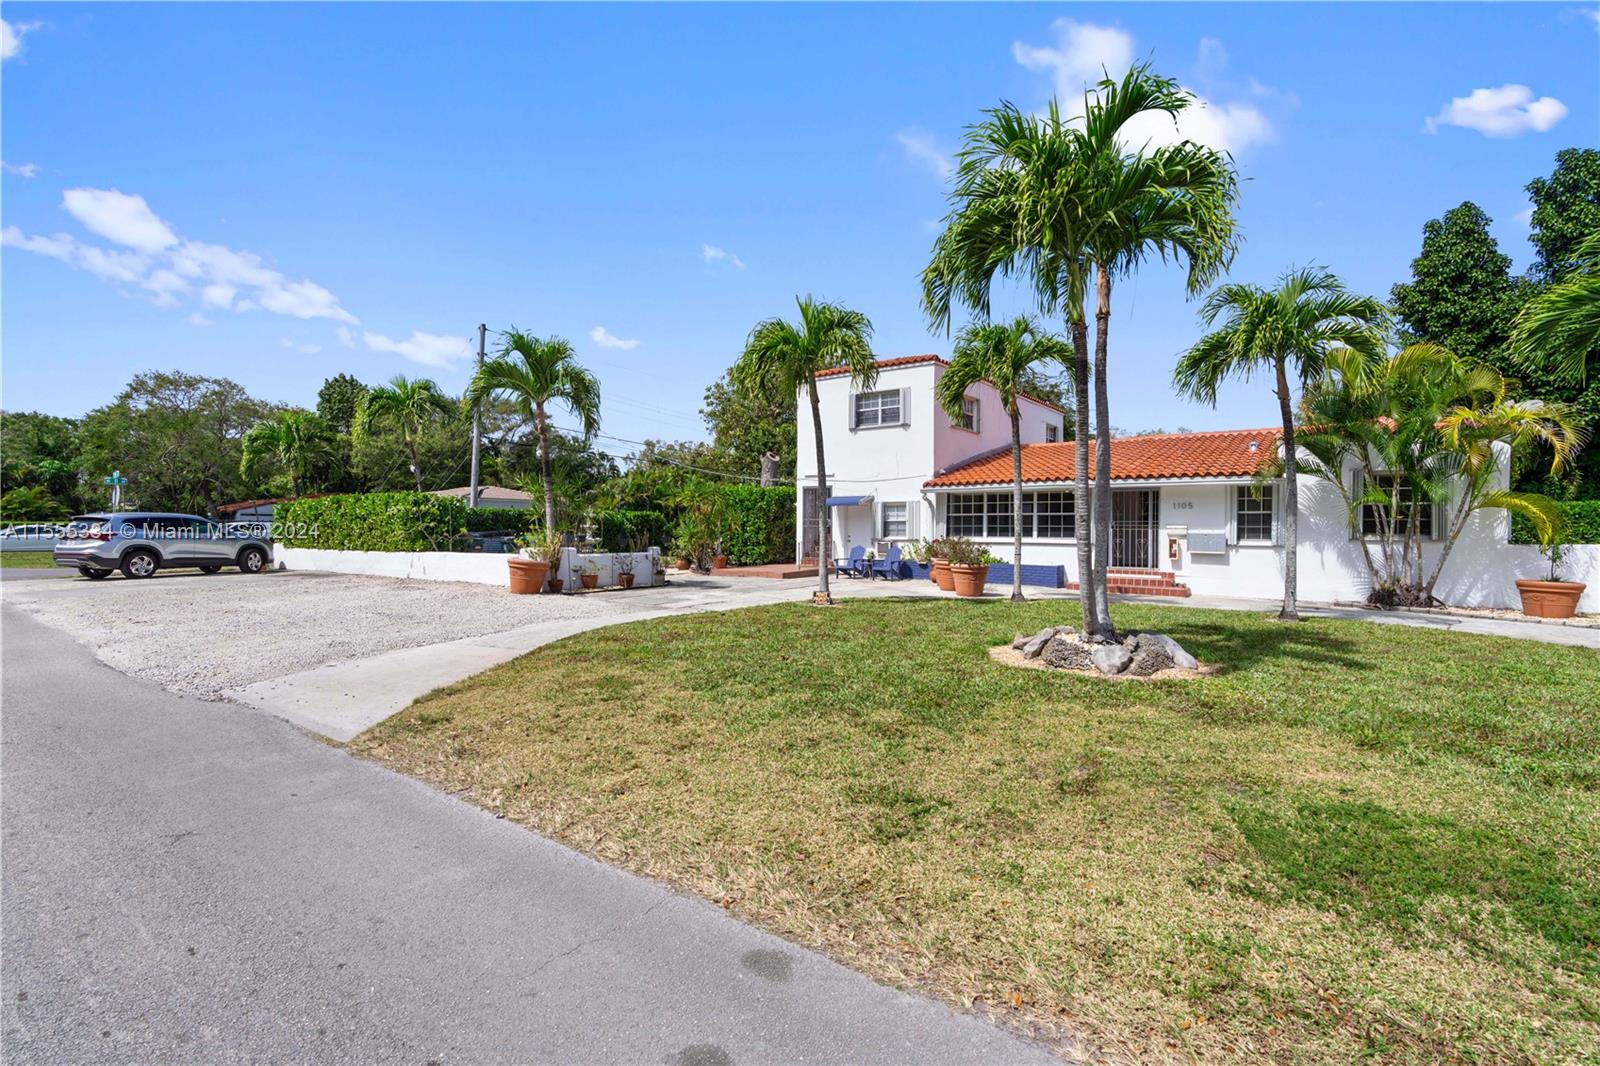 Rental Property at 1105 Ne 119th St St, Biscayne Park, Miami-Dade County, Florida -  - $1,325,000 MO.